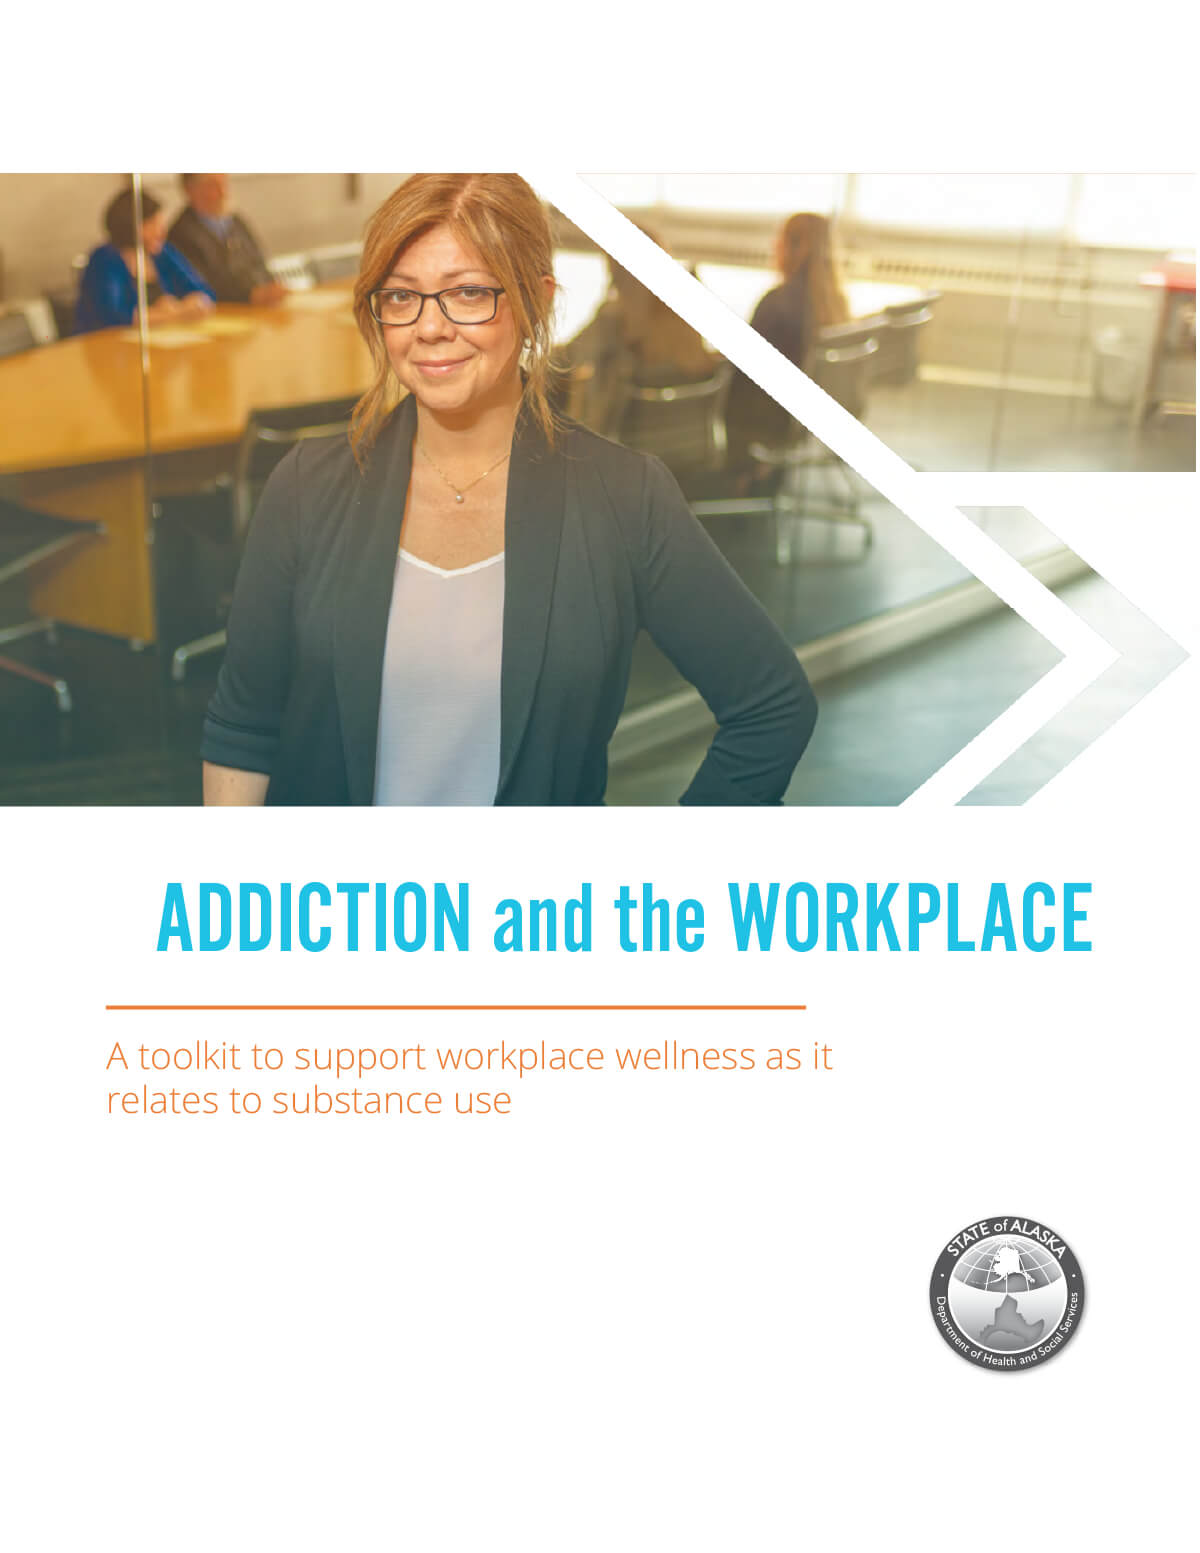 Addiction and the Workplace: A toolkit to support workplace wellness as it relates to substance use - State of Alaska